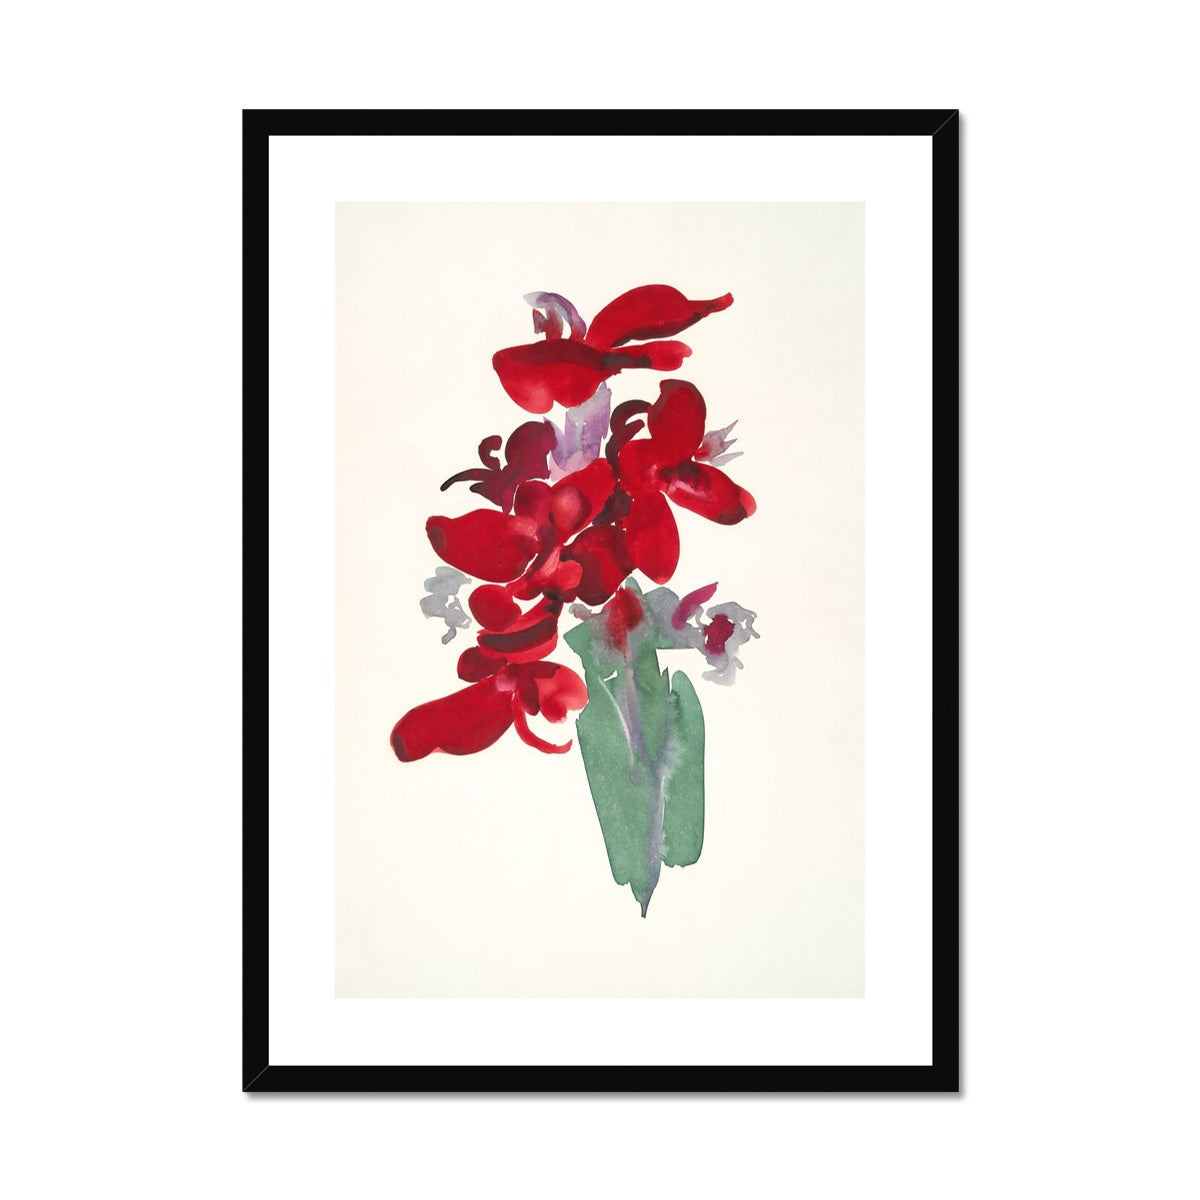 &#39;Red Canna&#39;  by Georgia O’Keeffe. Open Edition Fine Art Print. Framed Open Edition Fine Art Print. Historic Art